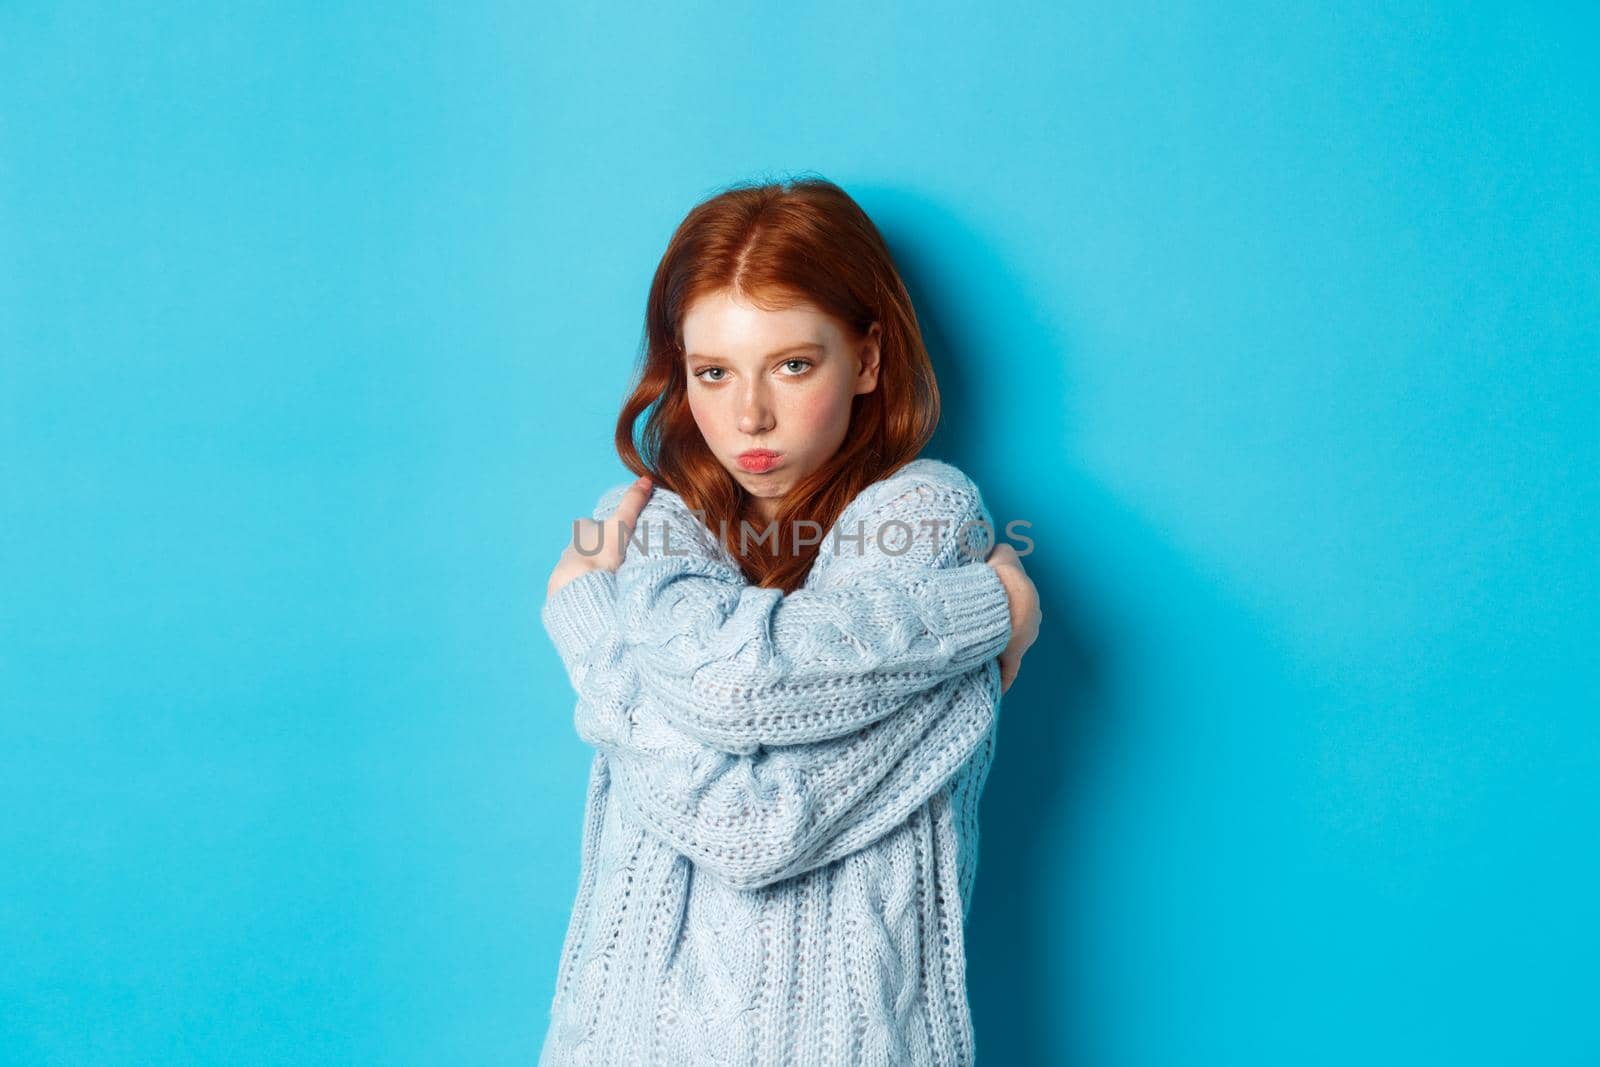 Silly and cute redhead girl pucker lips and looking offended, comforting herself by cuddling, embracing body and staring at camera defensive, blue background.